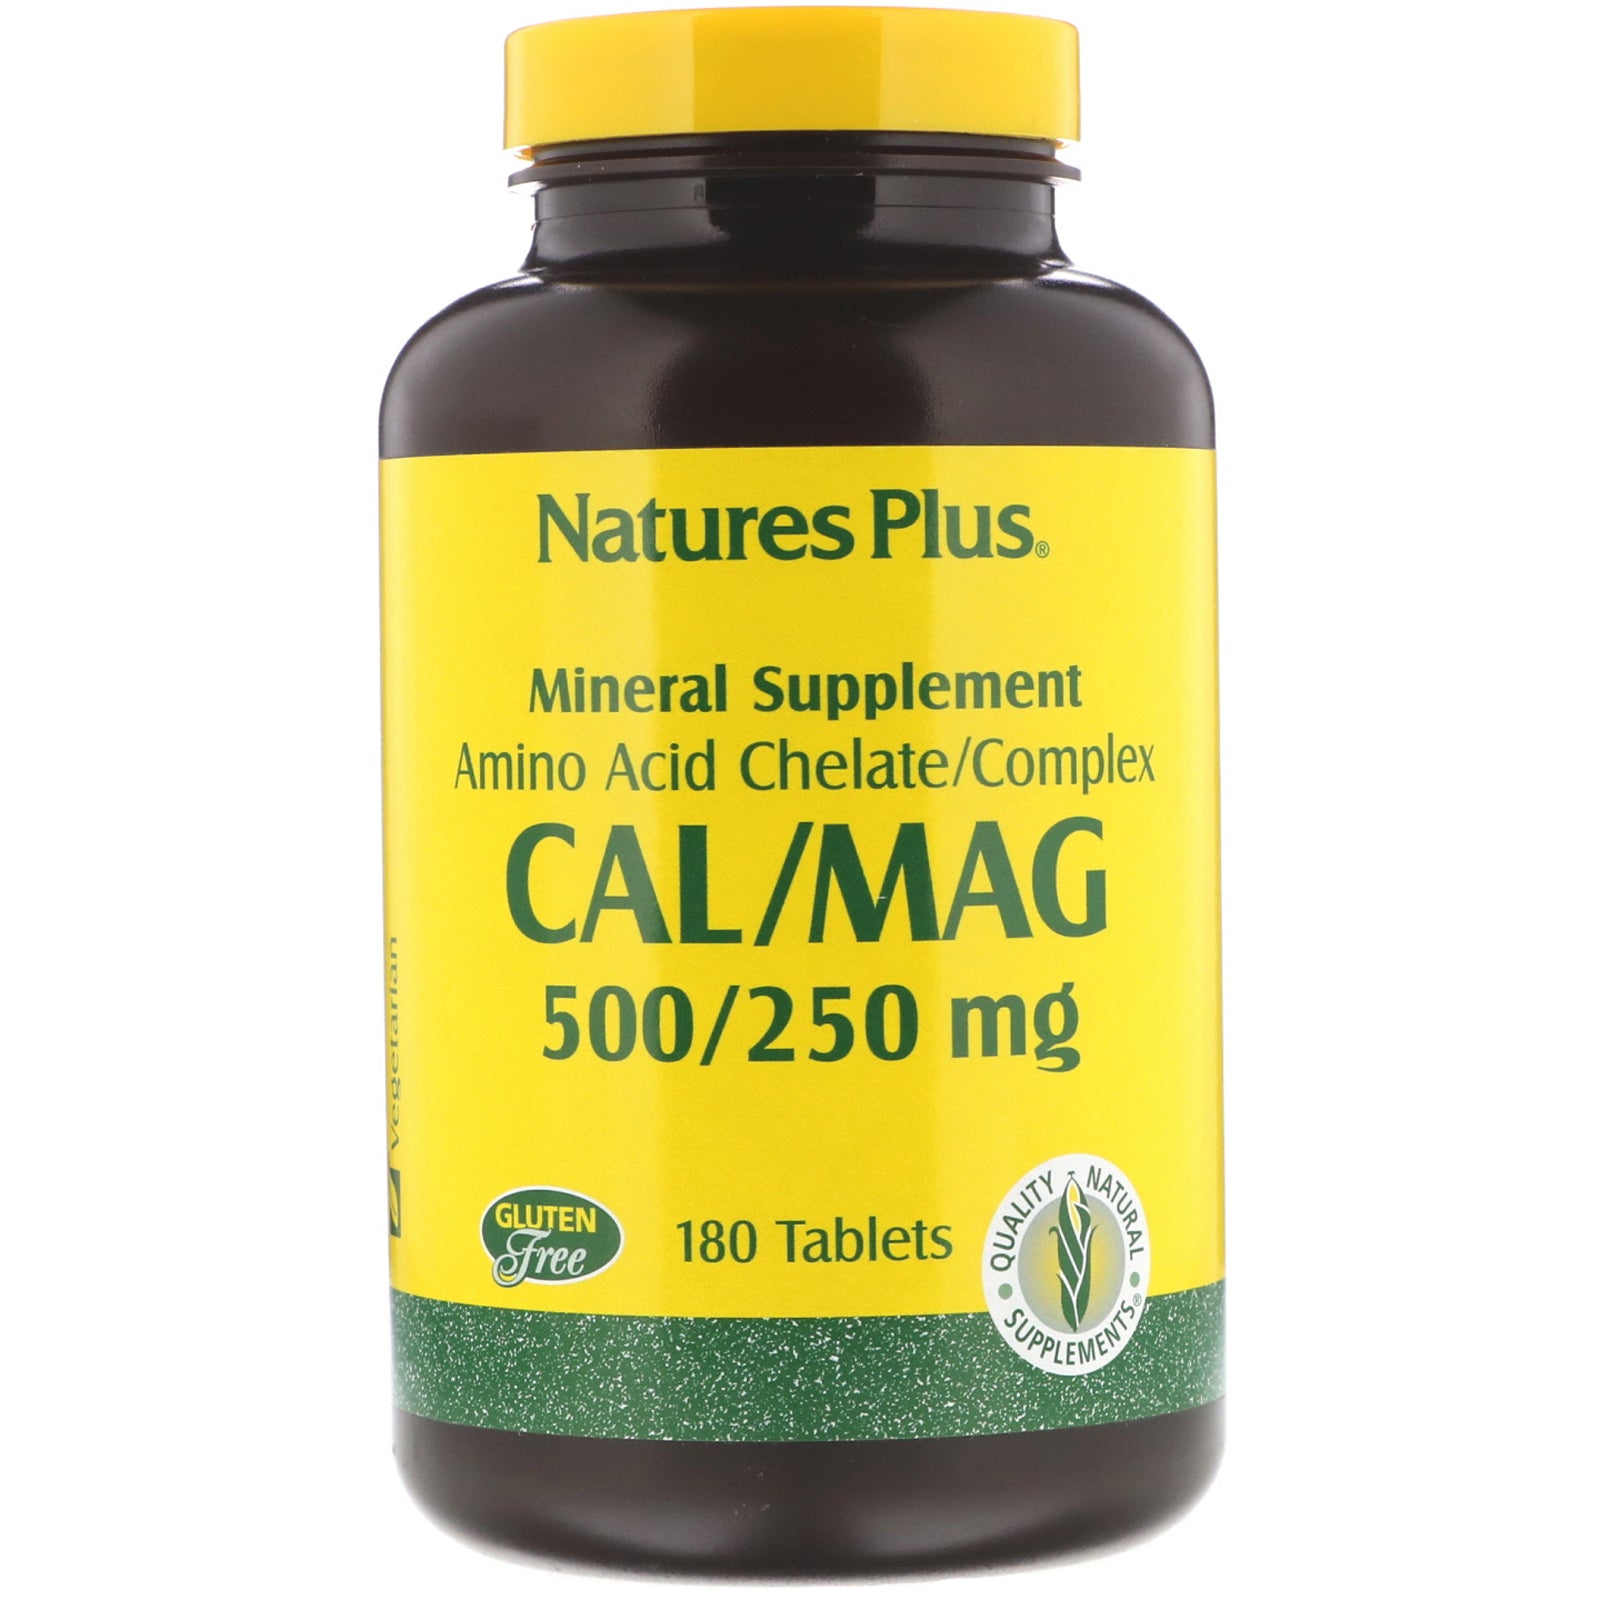 Nature's Plus, Cal/Mag, 500/250 mg, 180 Tablets